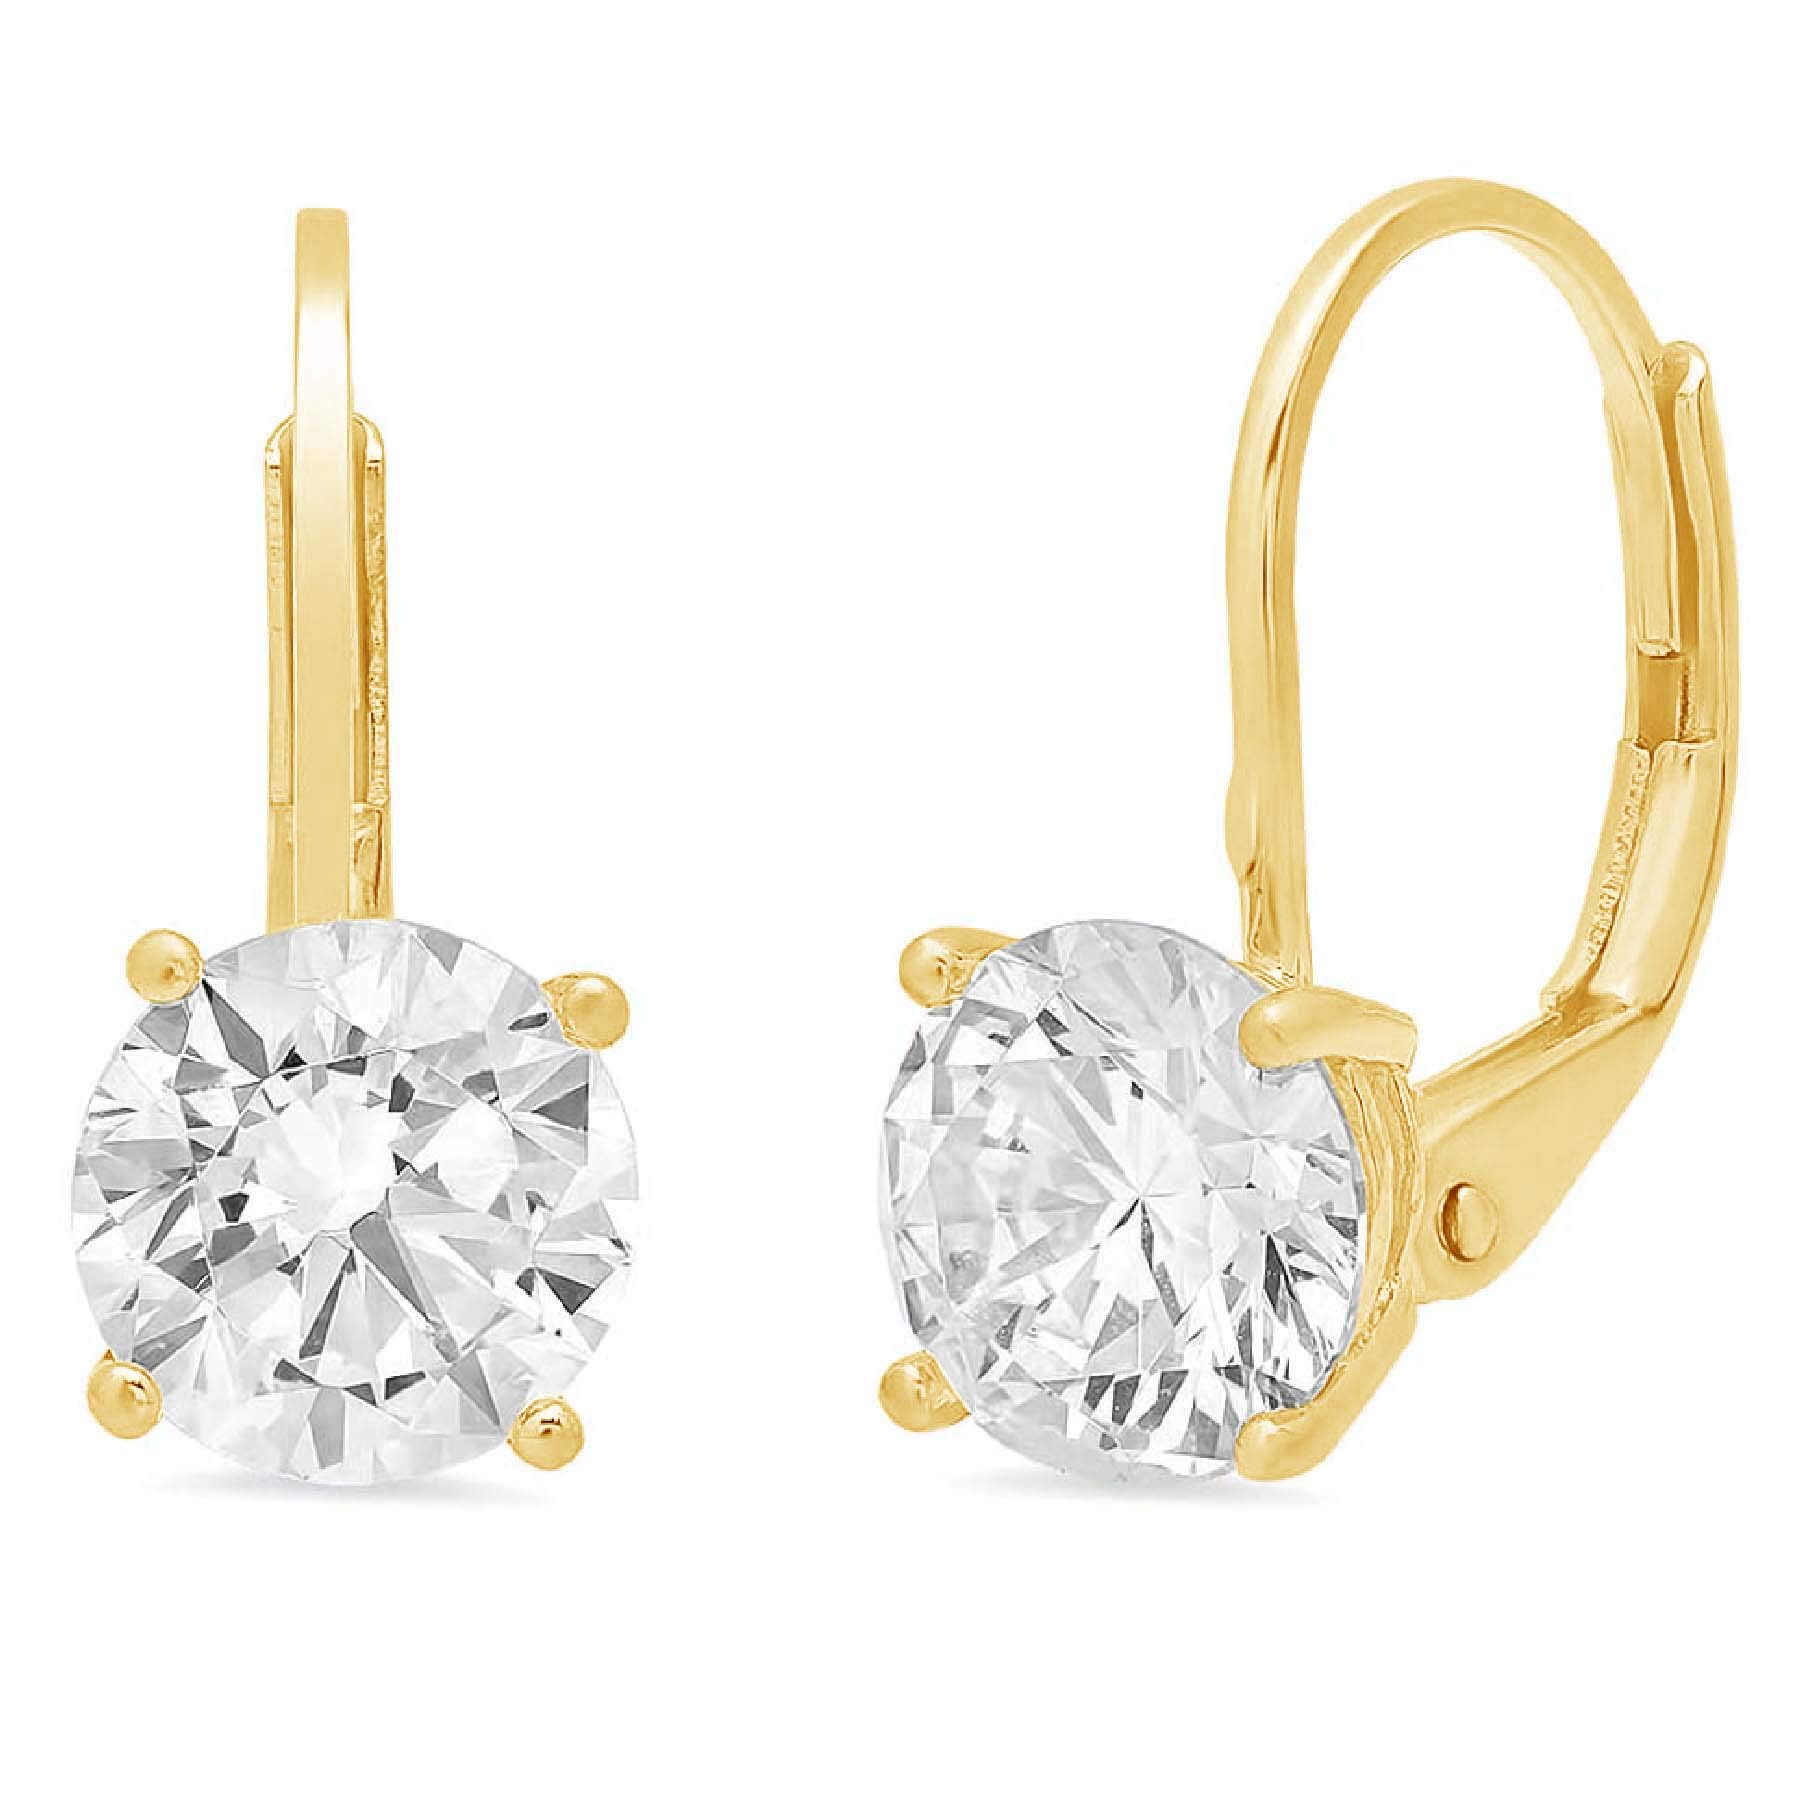 2.0 ct Round Cut ideal VVS1 Conflict Free Gemstone Solitaire Genuine Moissanite Designer Lever back Drop Dangle Earrings Solid 14k Yellow Gold